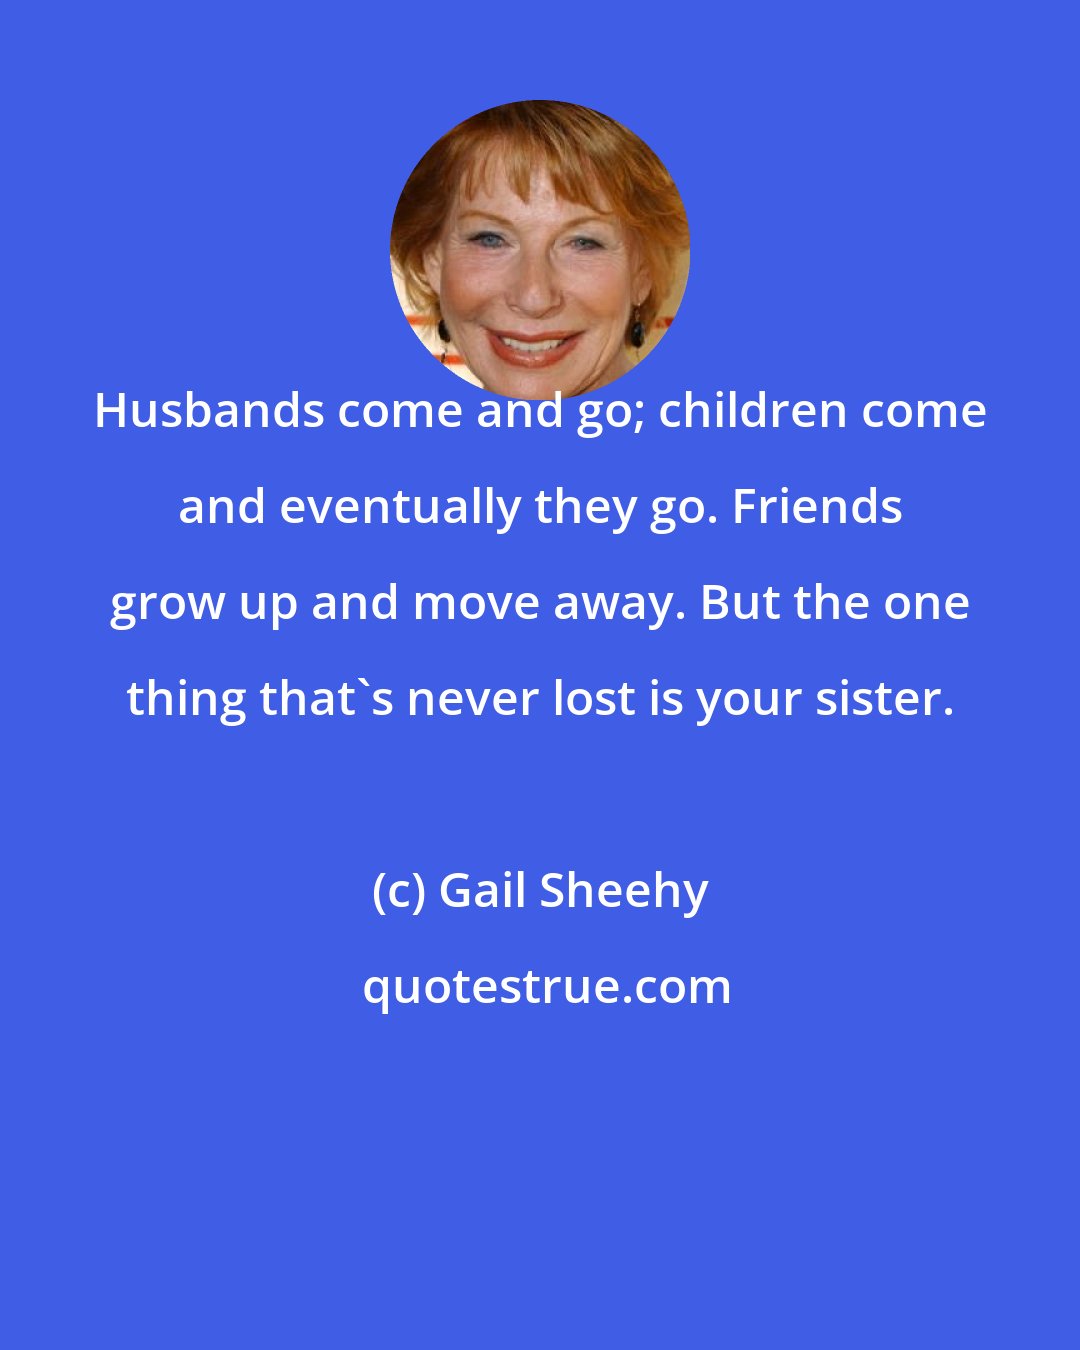 Gail Sheehy: Husbands come and go; children come and eventually they go. Friends grow up and move away. But the one thing that's never lost is your sister.